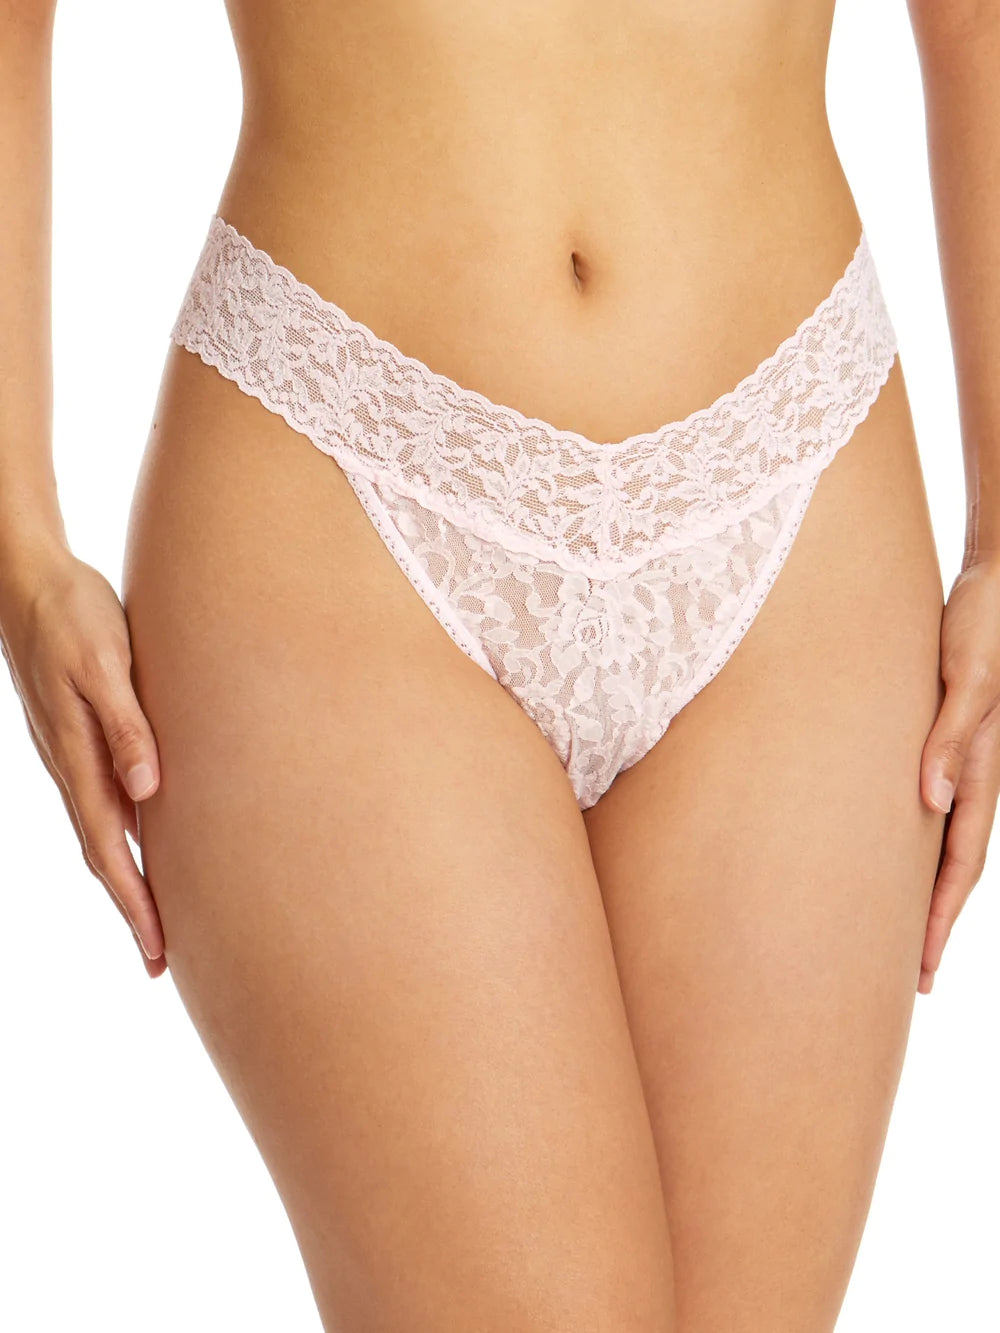 Original Rise Signature Lace Thong In Bliss Pink - Hanky Panky – BraTopia